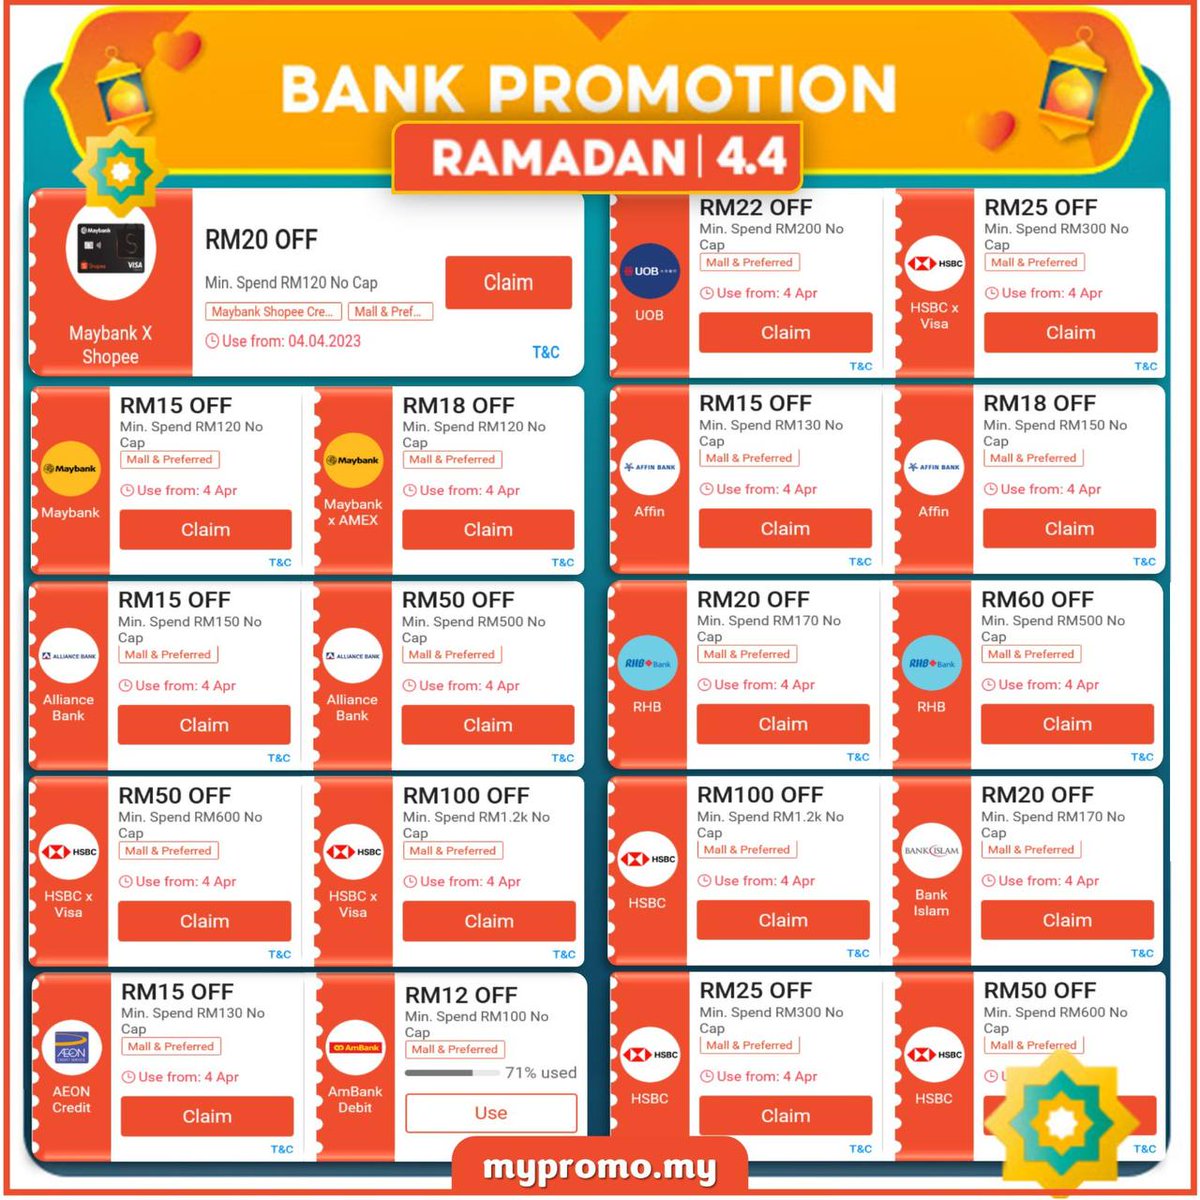 Shopee 4.4 Bank Vouchers is ready!
mypromo.my/shp/bank

High Value Vouchers worth up to RM100!
Claim All Now!

#ShopeeMY #RamadanBersamaShopee #ShopeeRamadanKasiSayang

4.4 Sale - All Important Links
mypromo.my/sale-all-impor…